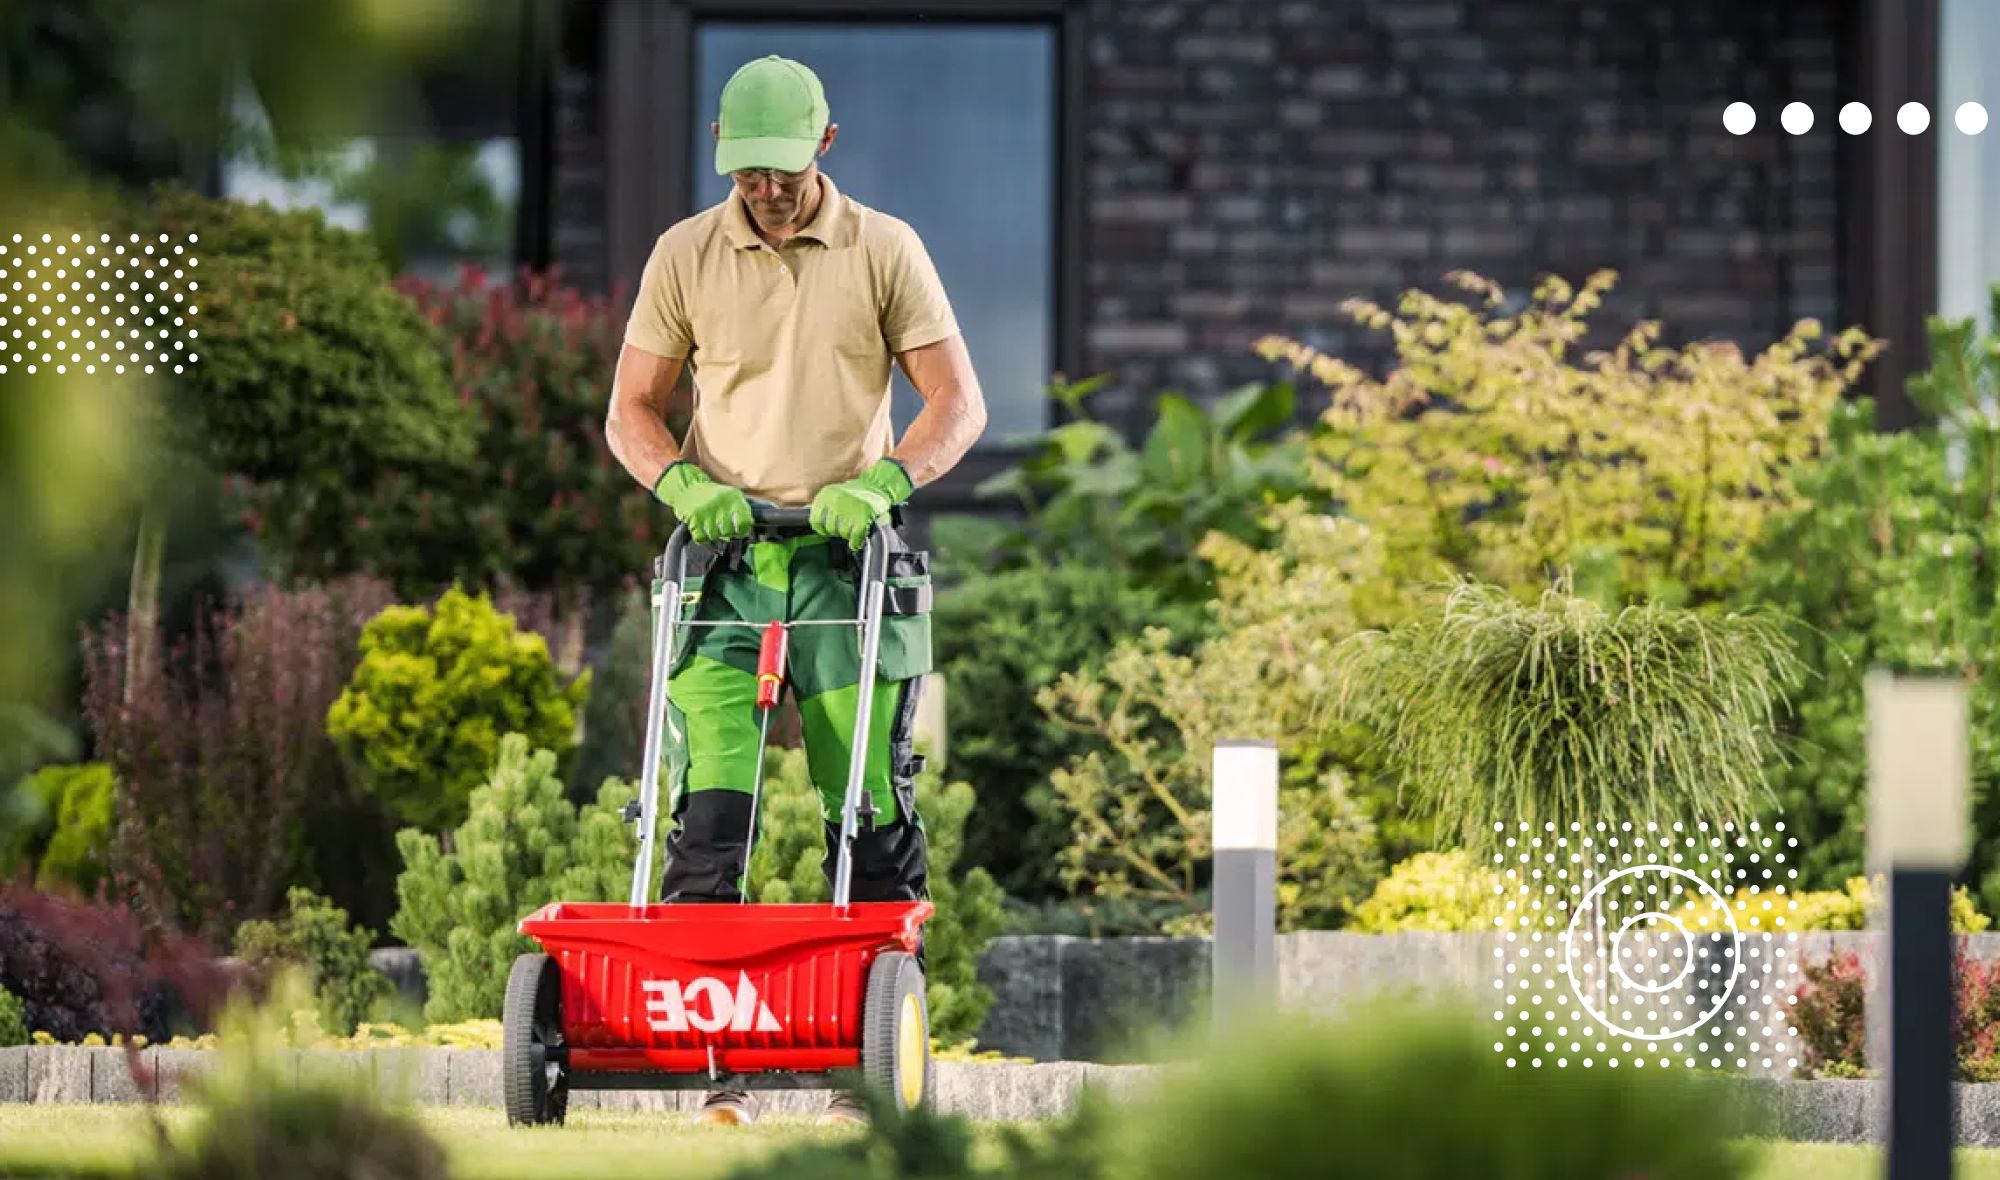 Selecting the Best Seed Spreader for a Healthy, Lush Lawn